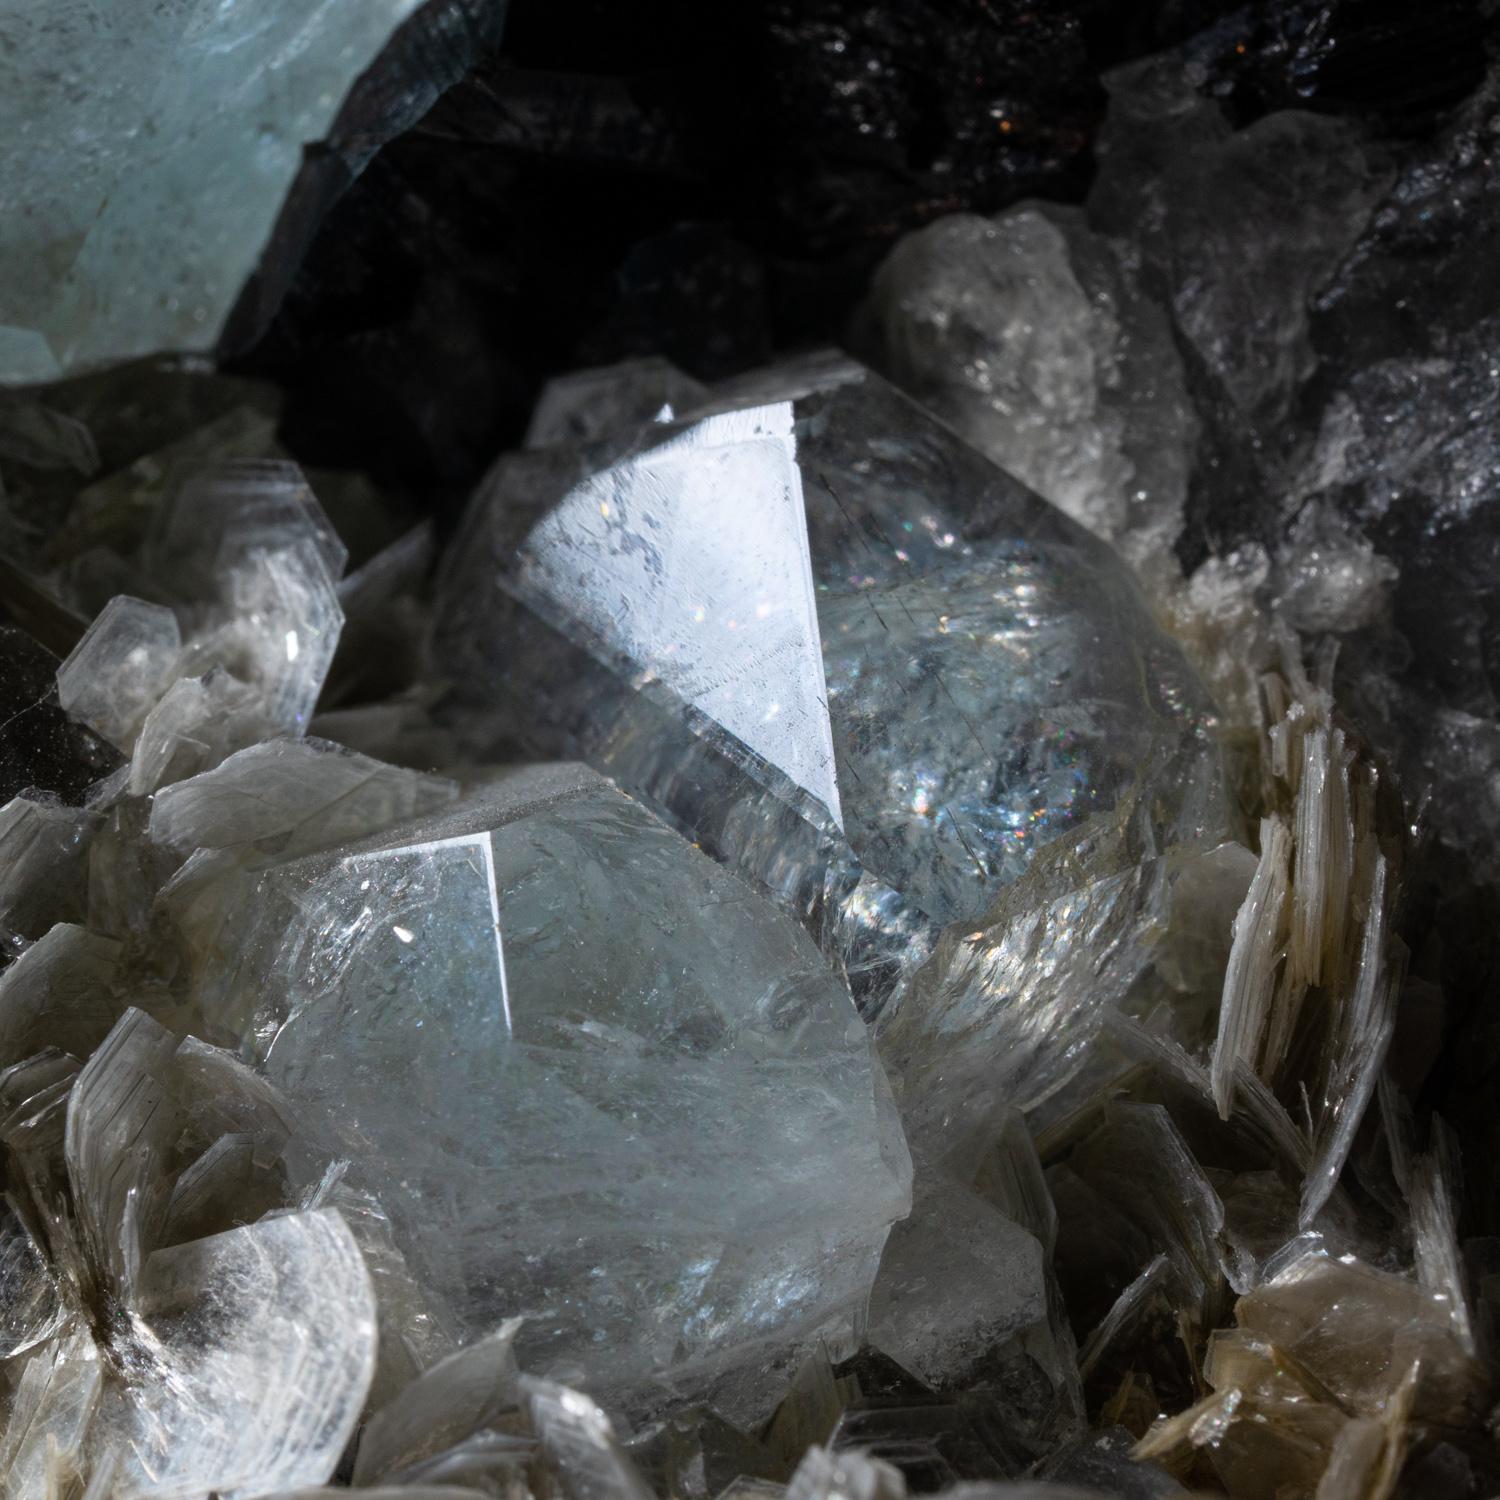 From Xuebaoding Mountain near Pingwu, Sichuan Province, China

Lustrous light blue aquamarine crystals with composed of bladed silvery muscovite crystal in a radiating sprays. The aquamarine is fully terminated with glassy luster faces.

 
Weight: